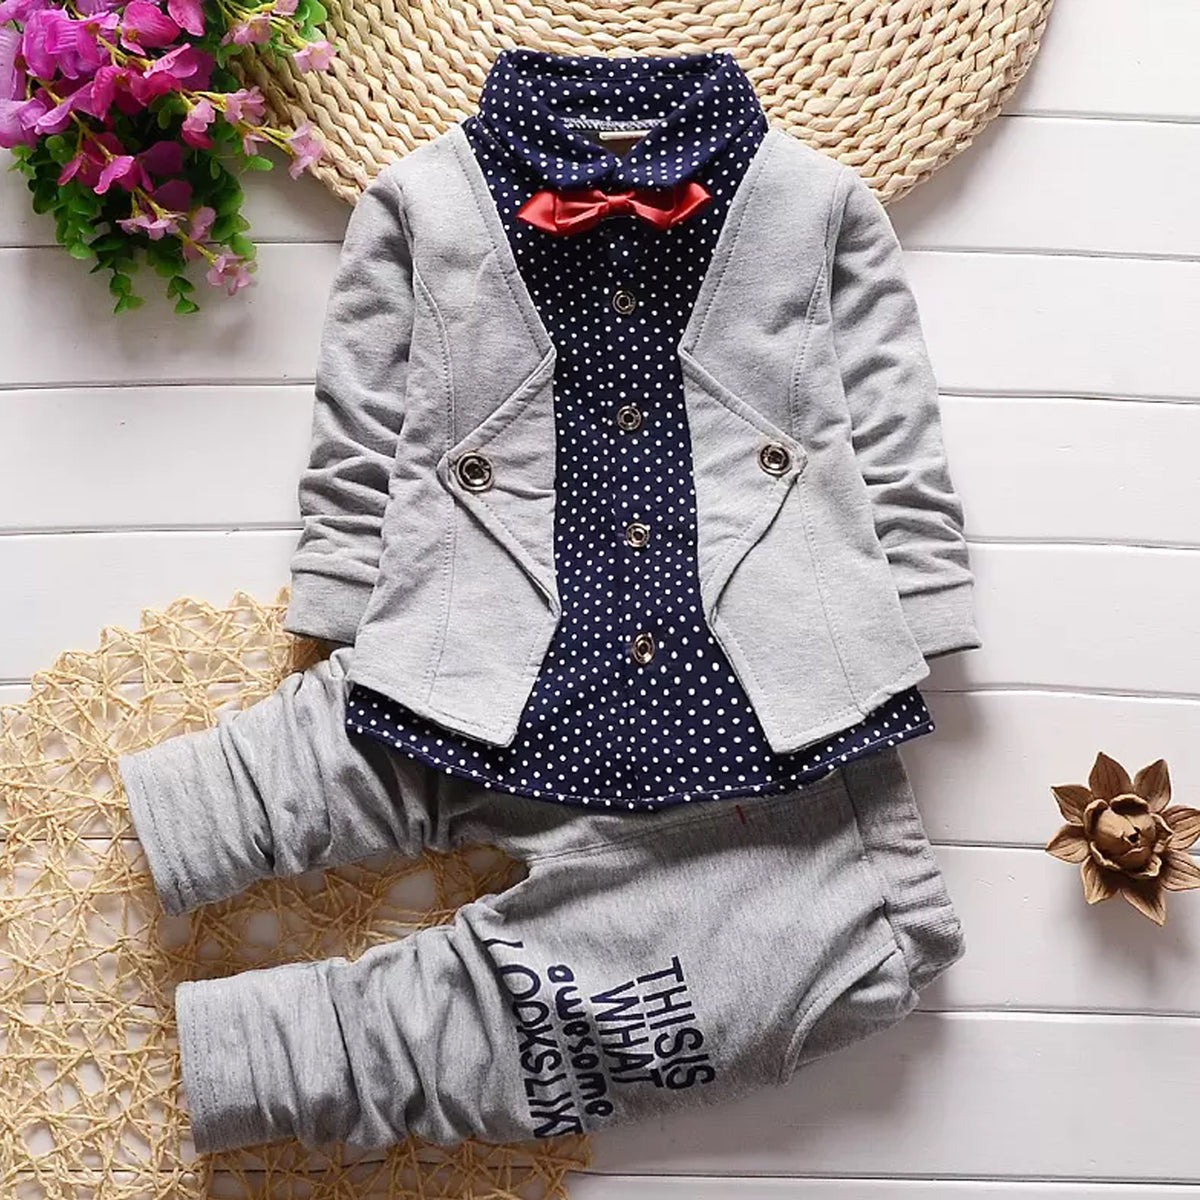 Boy's Cotton Blazer Attached Dot Print T-Shirt with Trouser Set-Gray, Blue, Red